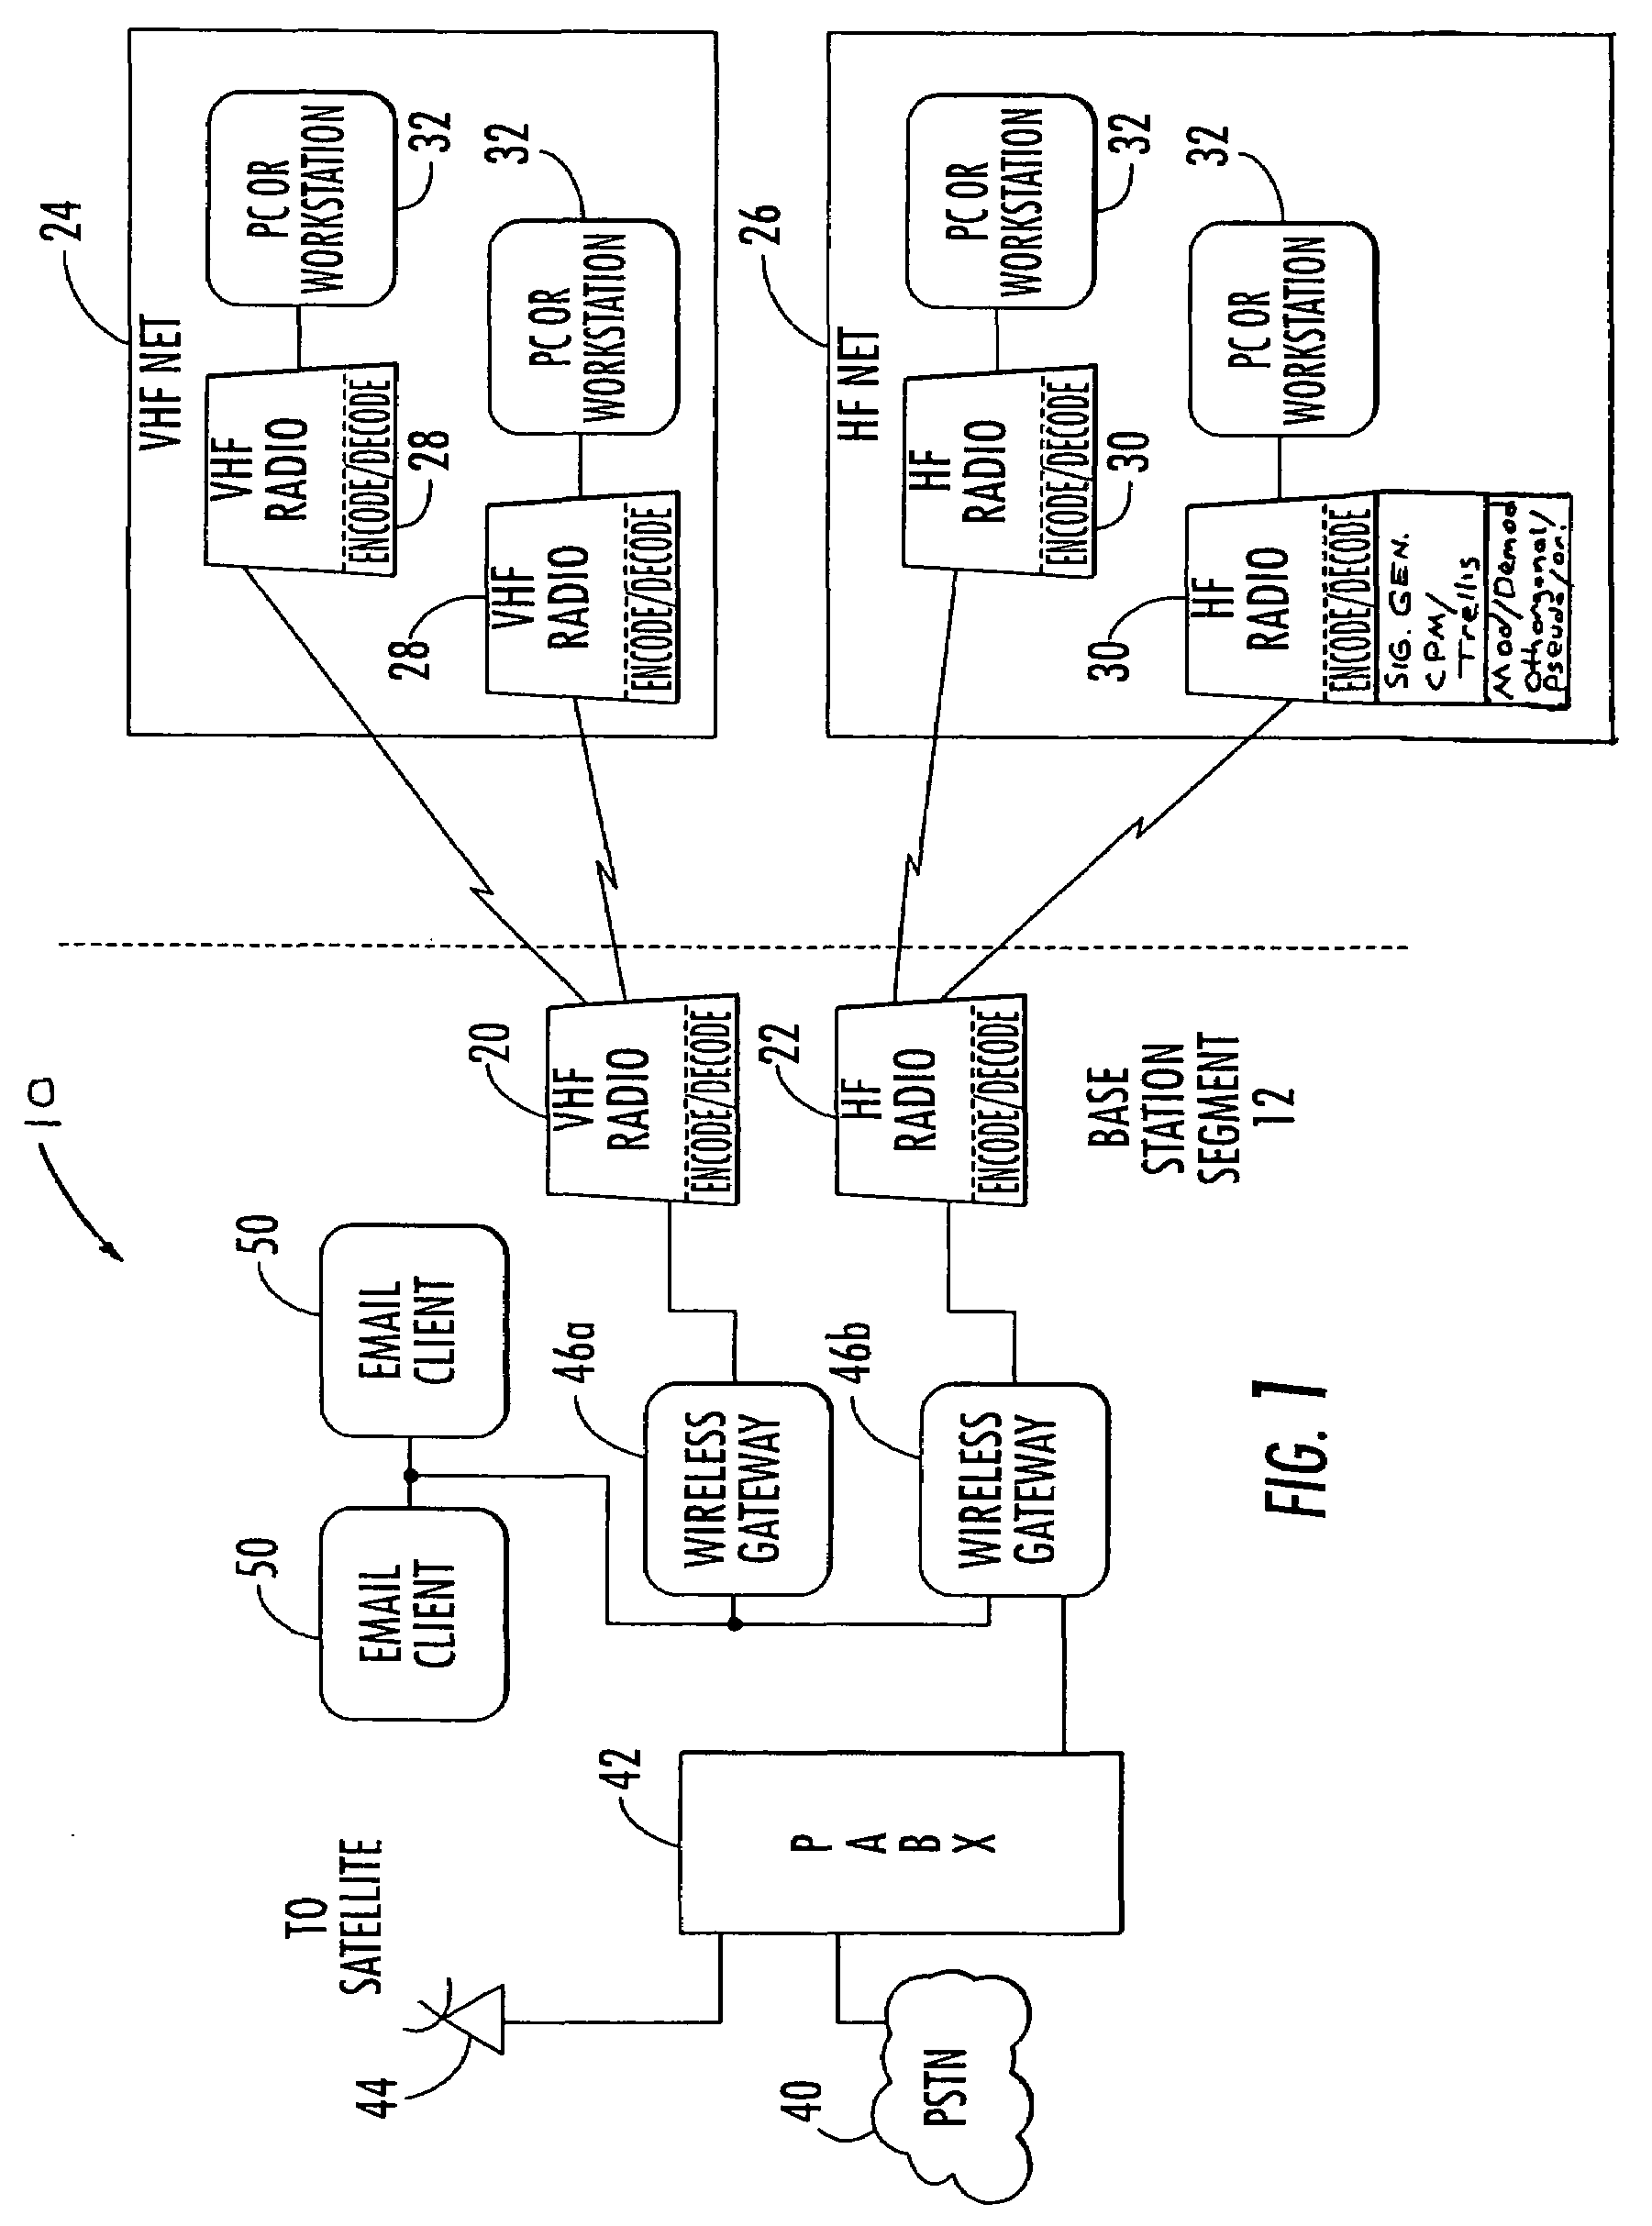 Continuous phase modulation system and method with added orthogonal signals